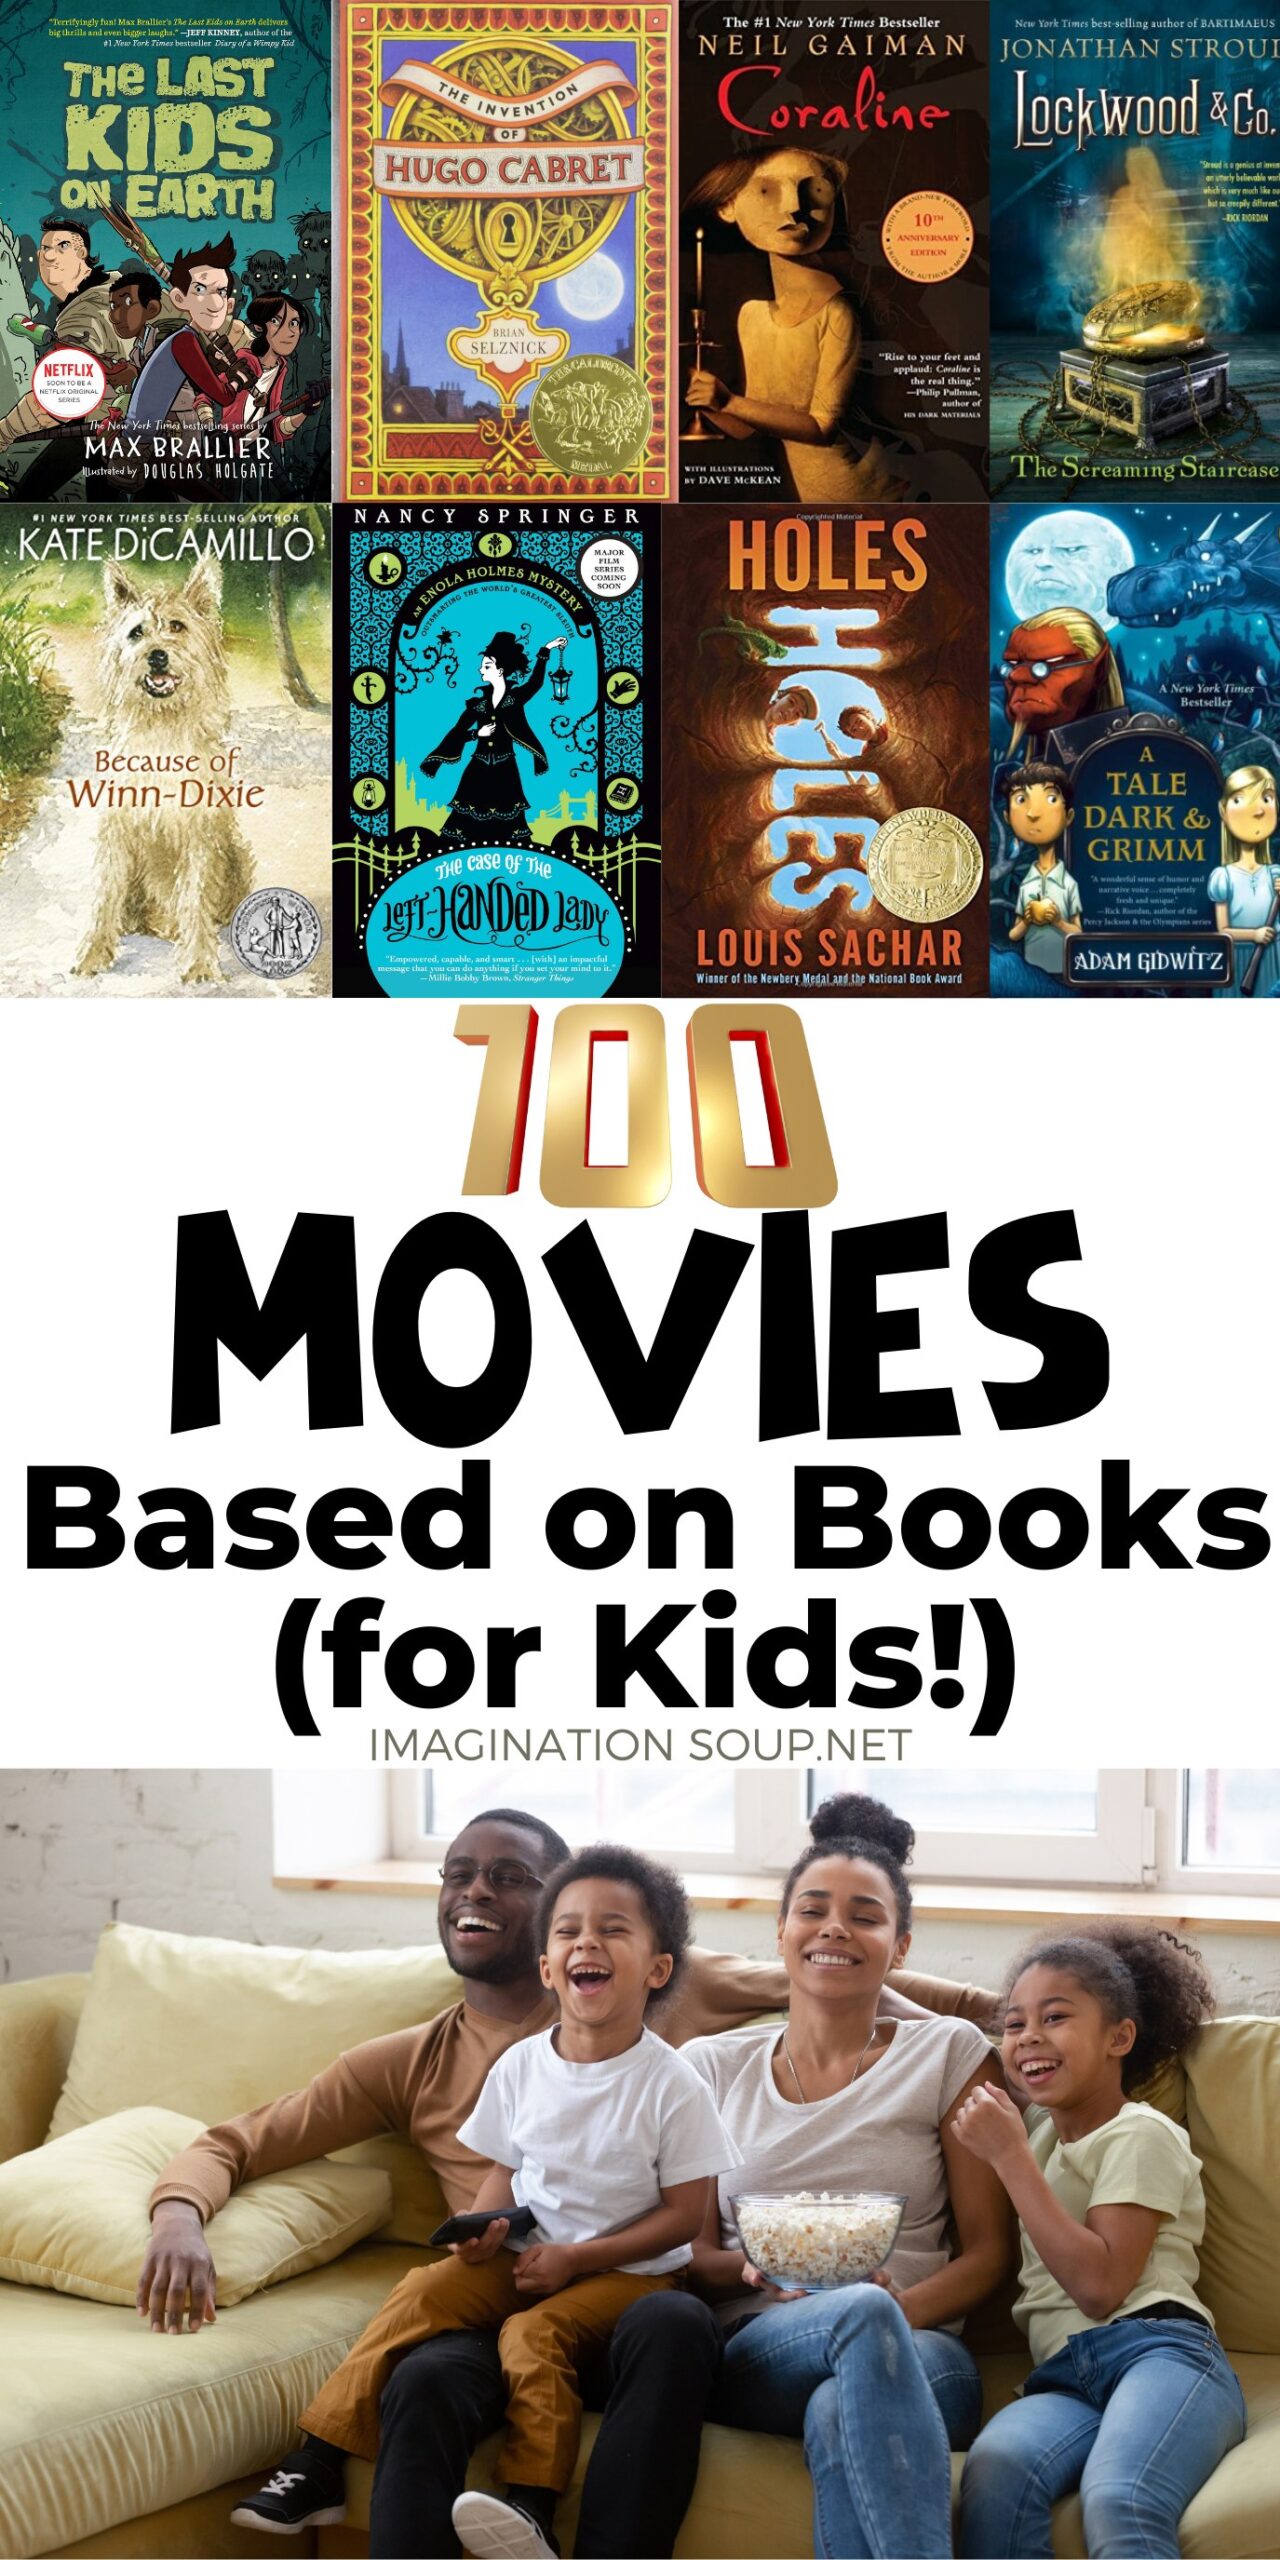 Want some easy motivation to get your kids reading more? Try movies based on books! Read the book first -- or second -- and use the books made into movies to inspire more reading!